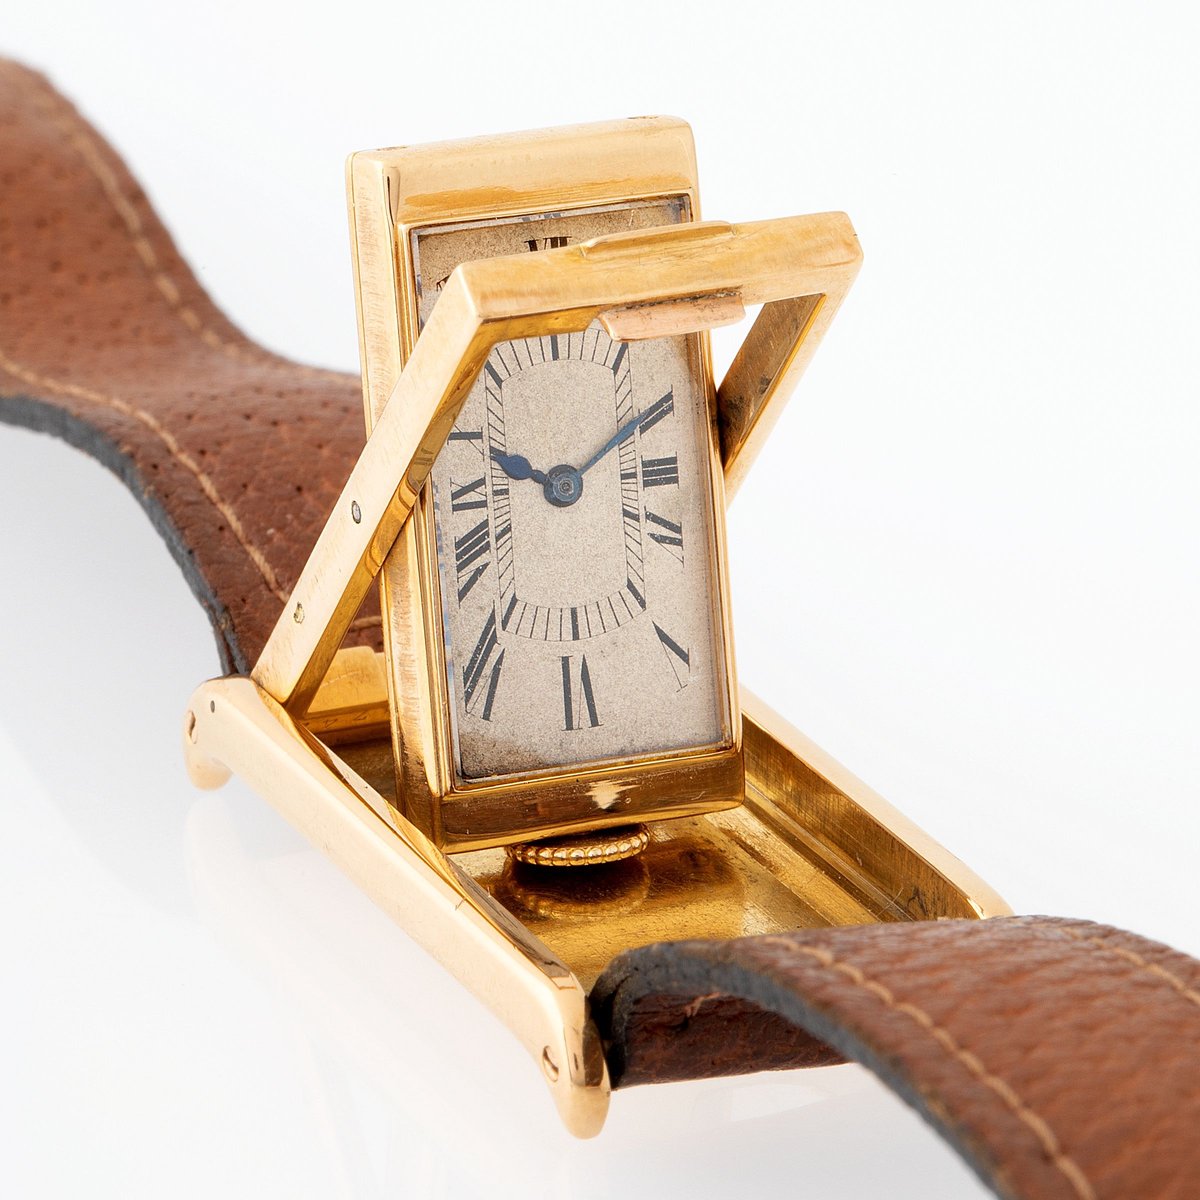 Still the best. Vintage Cartier Tank Louis. Wrist shots like this are the  icing on the cake!